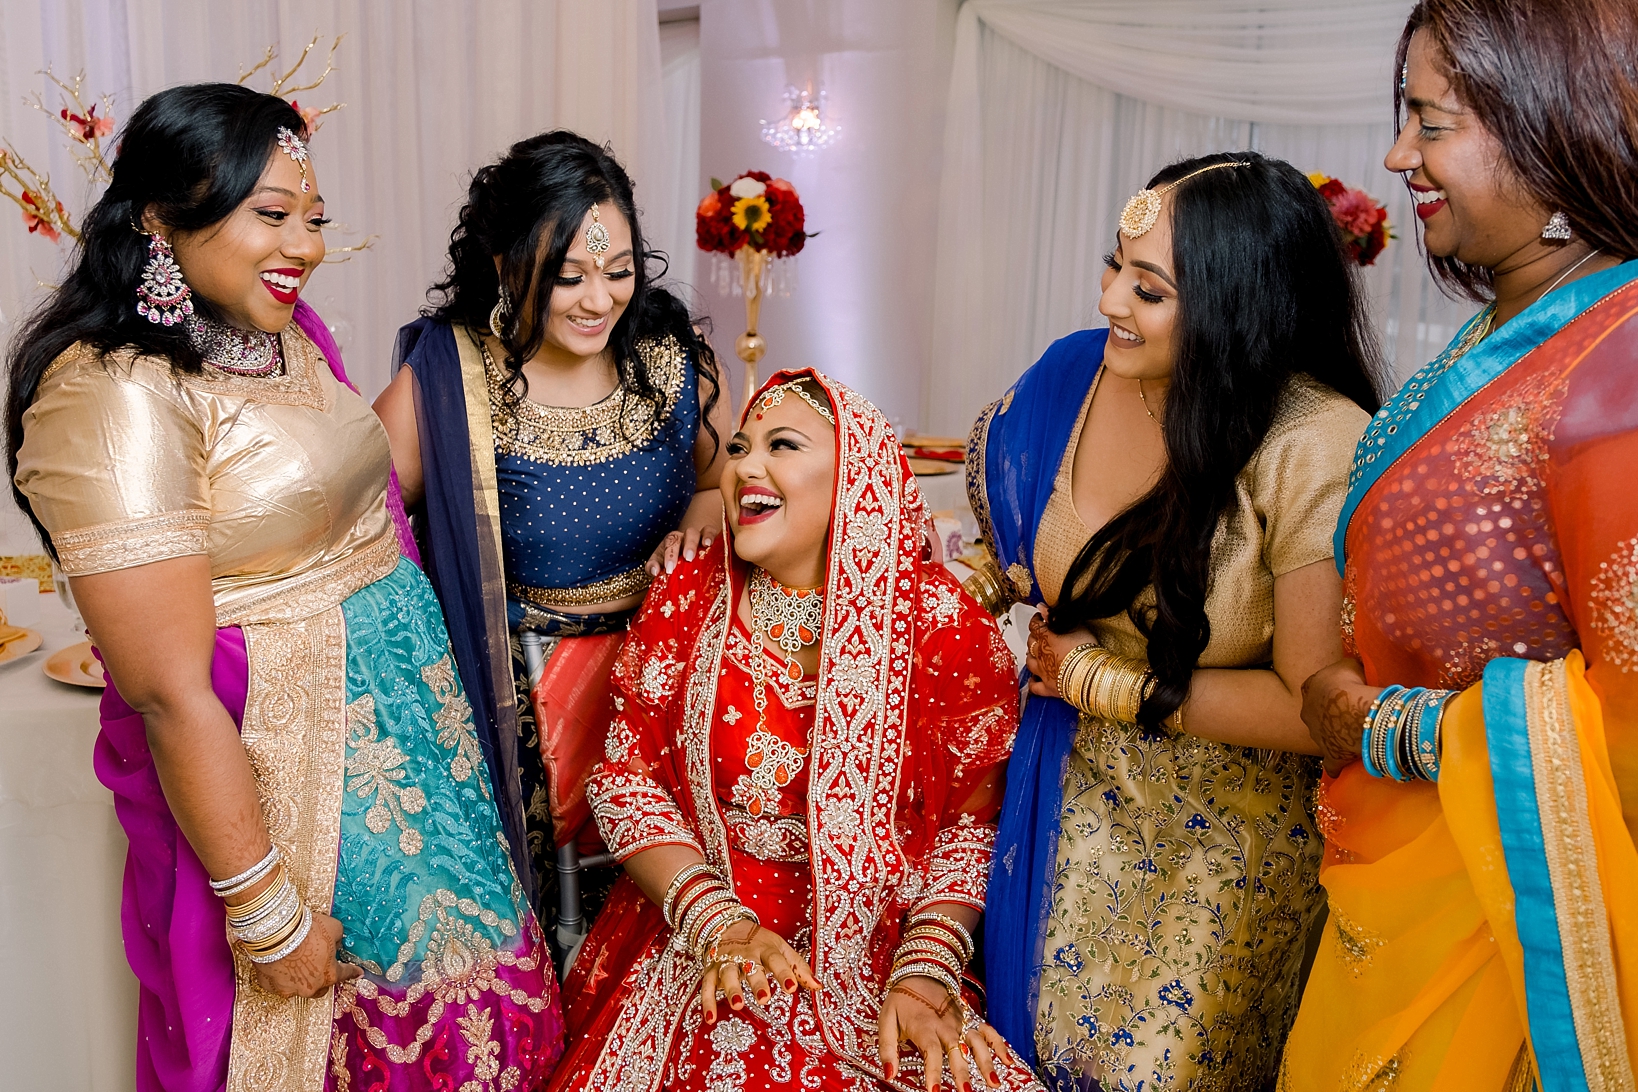 The Bride and her family and friends in full hindi attire before the wedding at the Crystal Ballroom in Clearwater, FL